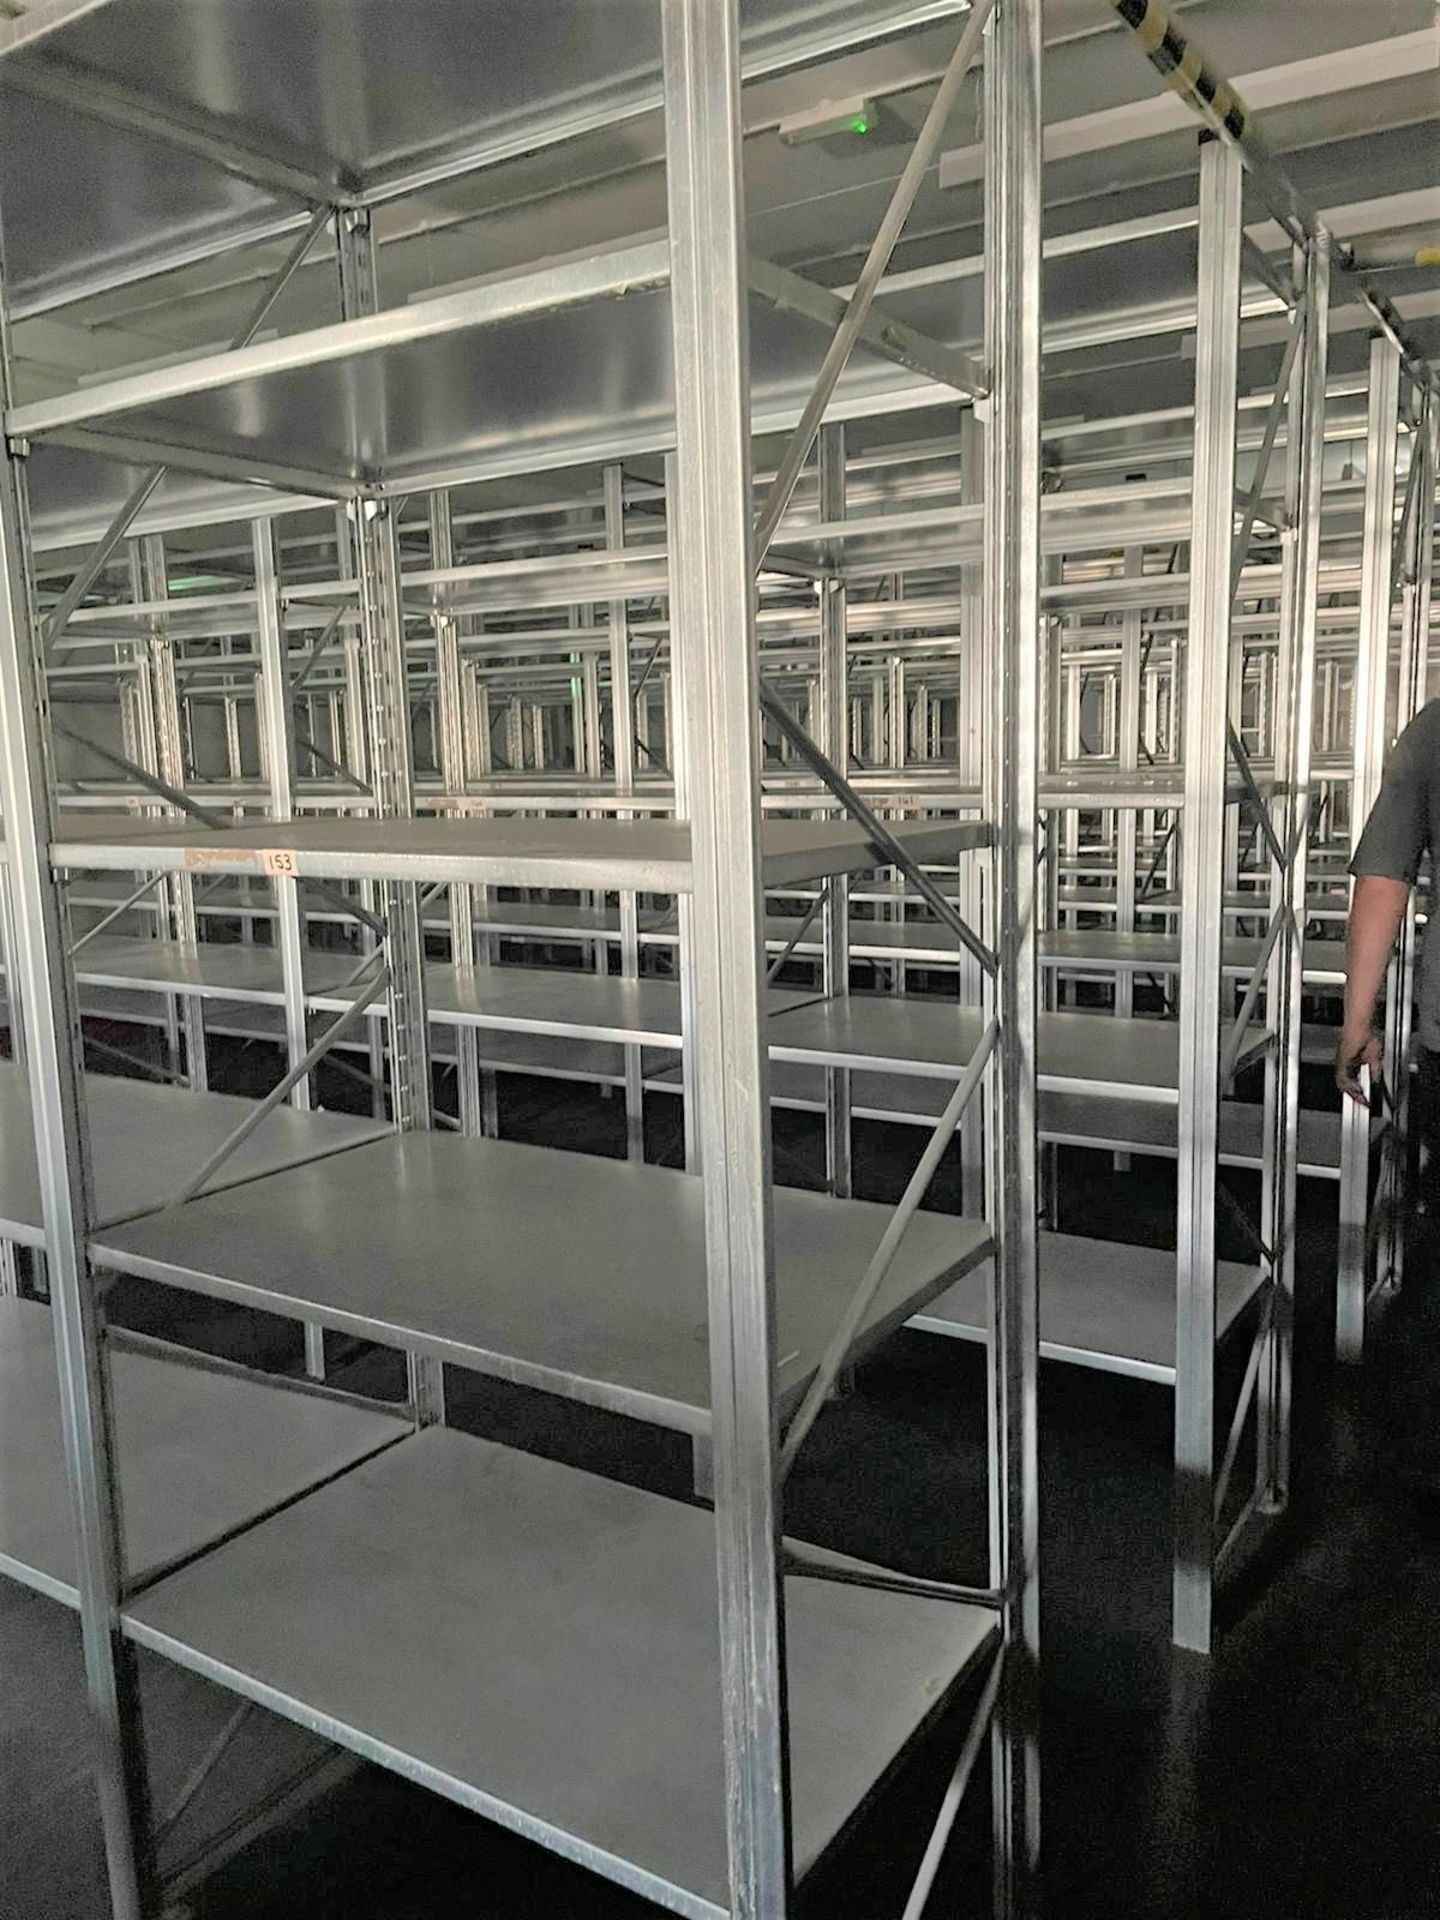 10 x Bays of High Quality Galvanised Steel Warehouse Shelving - Bay Dimensions: H250 x W100 x D60 - Image 9 of 12